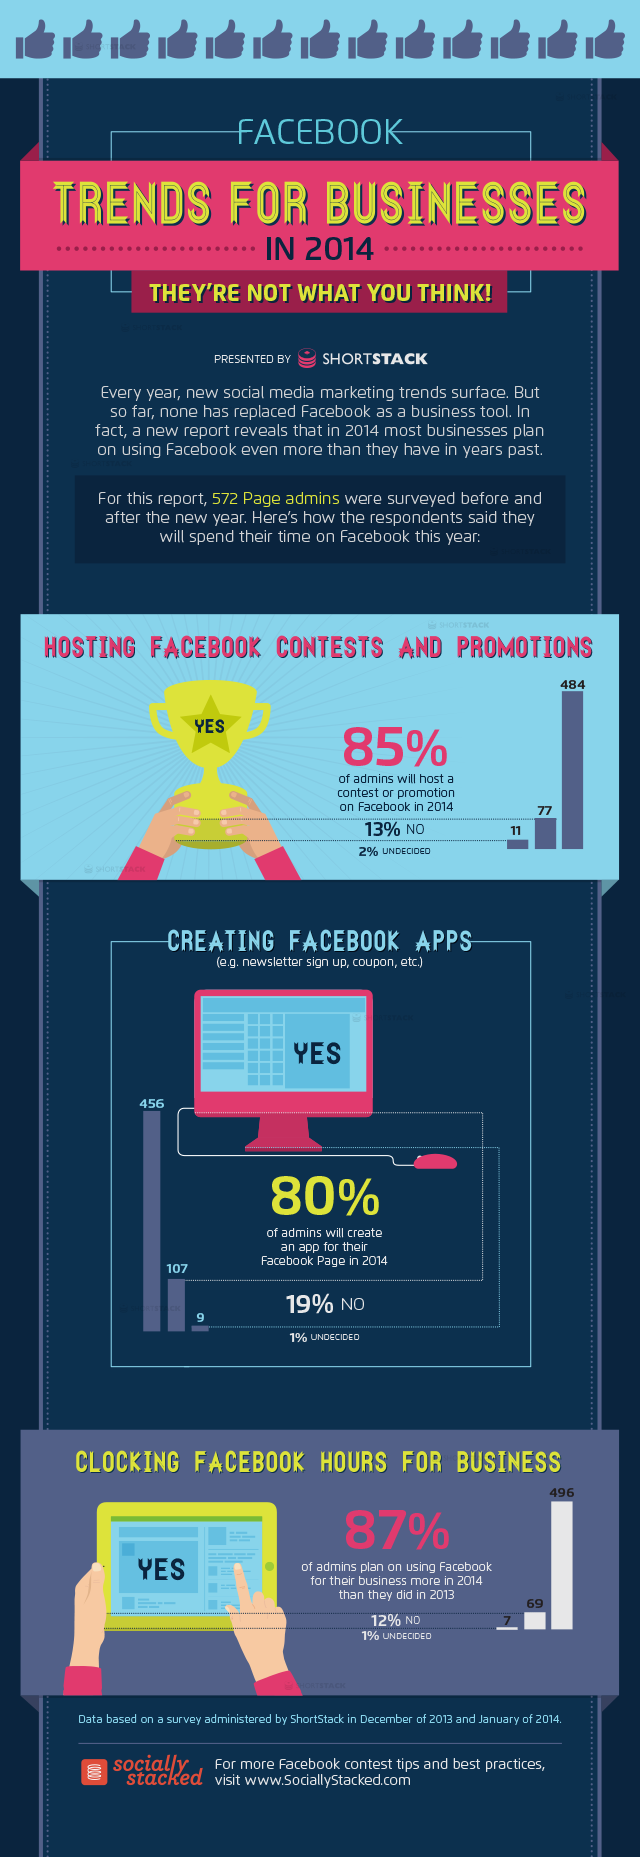 Facebook & Your Business in 2014 - What Are the Trends [INFOGRAPHIC]